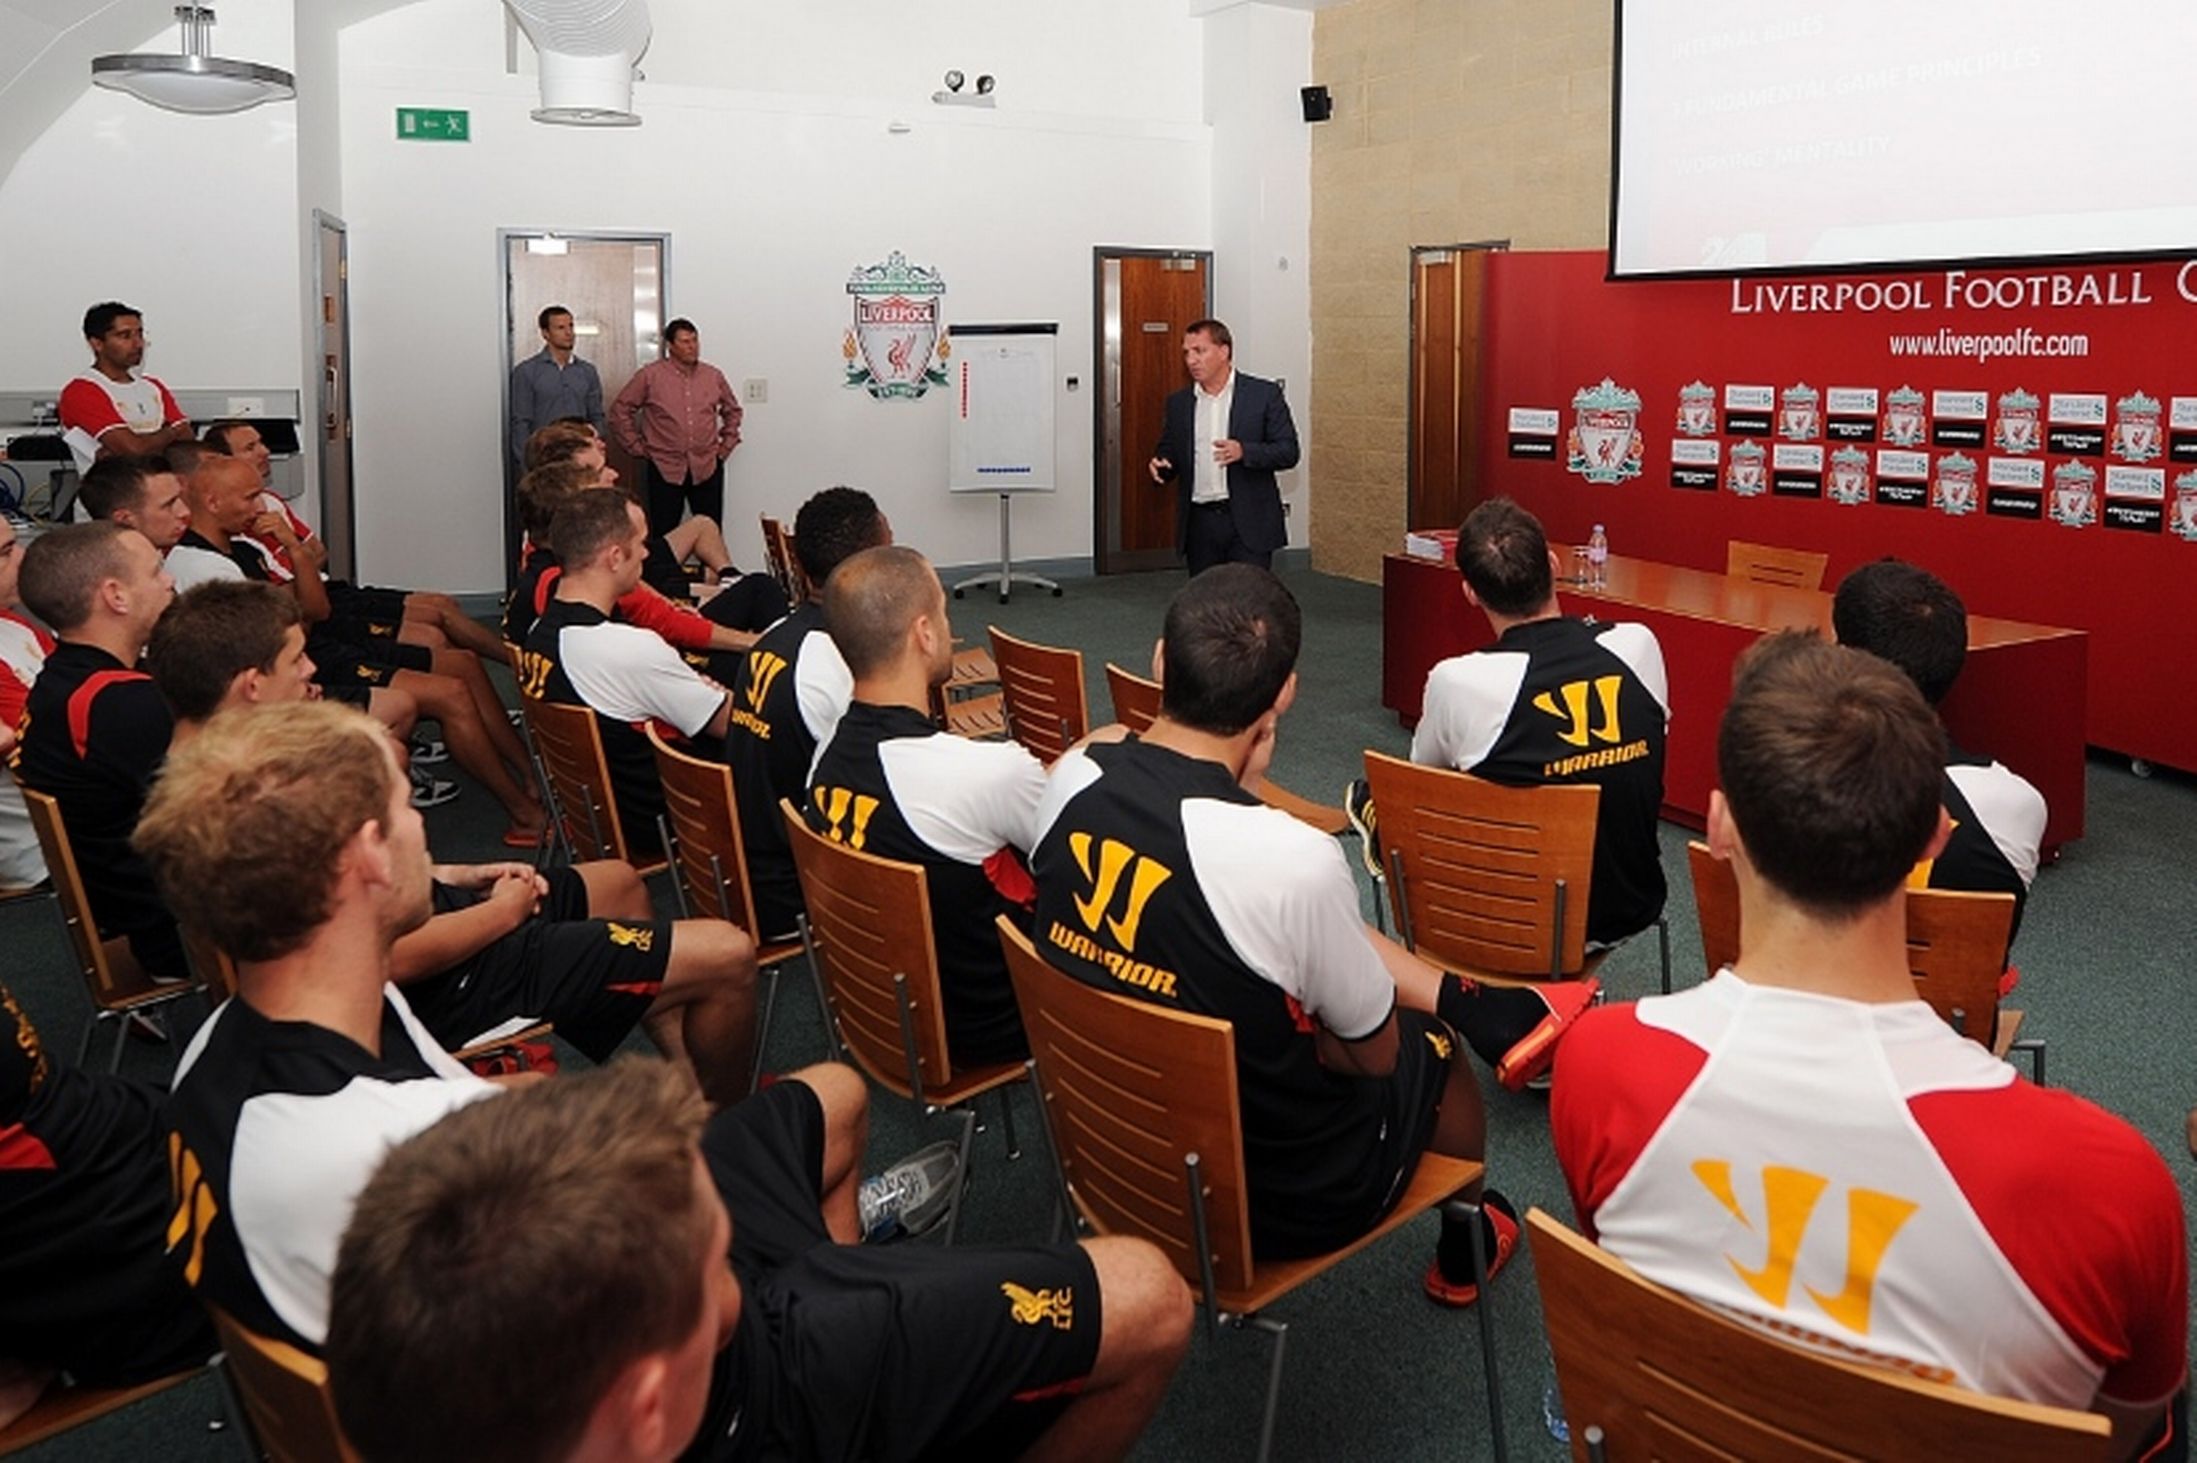 Brendan+Rodgers+First+Meeting+With+Liverpool+FC+Team